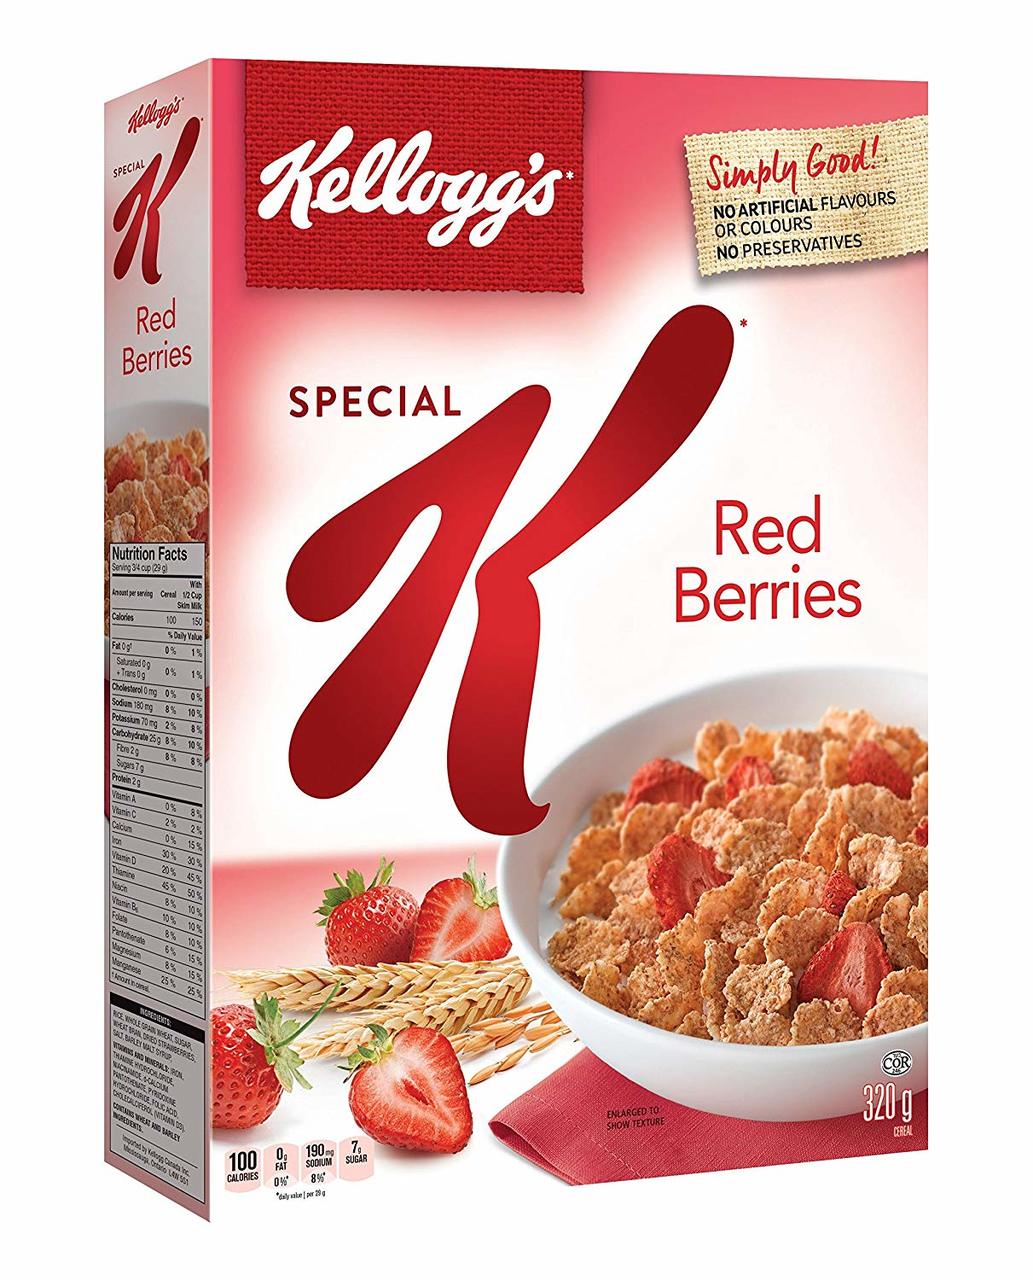 stm>Kellogg's Special K Red Berries 11.2oz